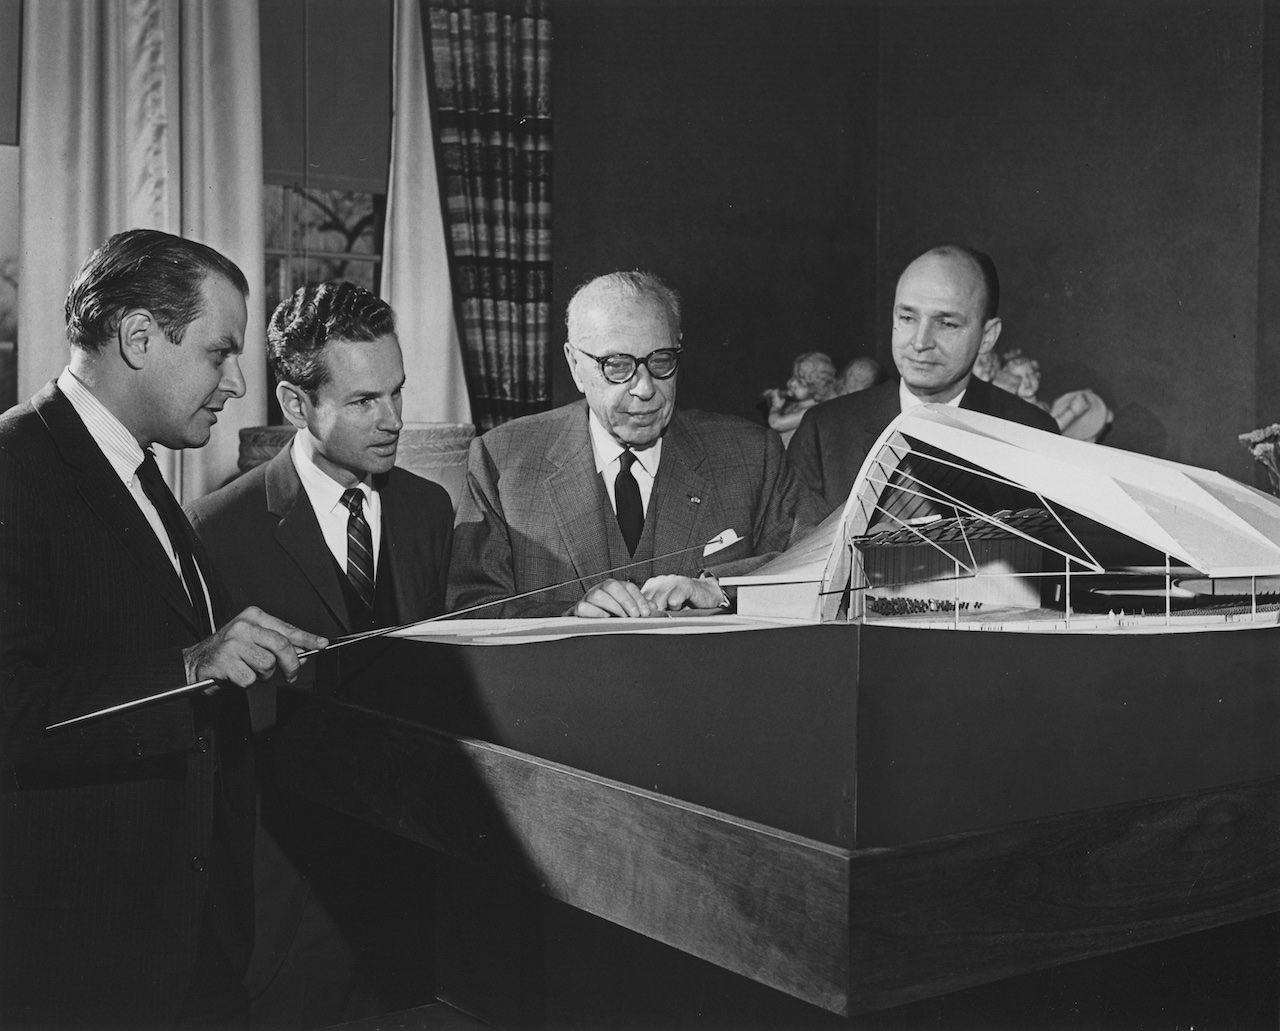 Christopher Jaffe (Acoustician), Louis Lane (Associate Conductor), George Szell (Music Director), and Peter von Dijk (Architect) discuss an early model of Blossom Music Center